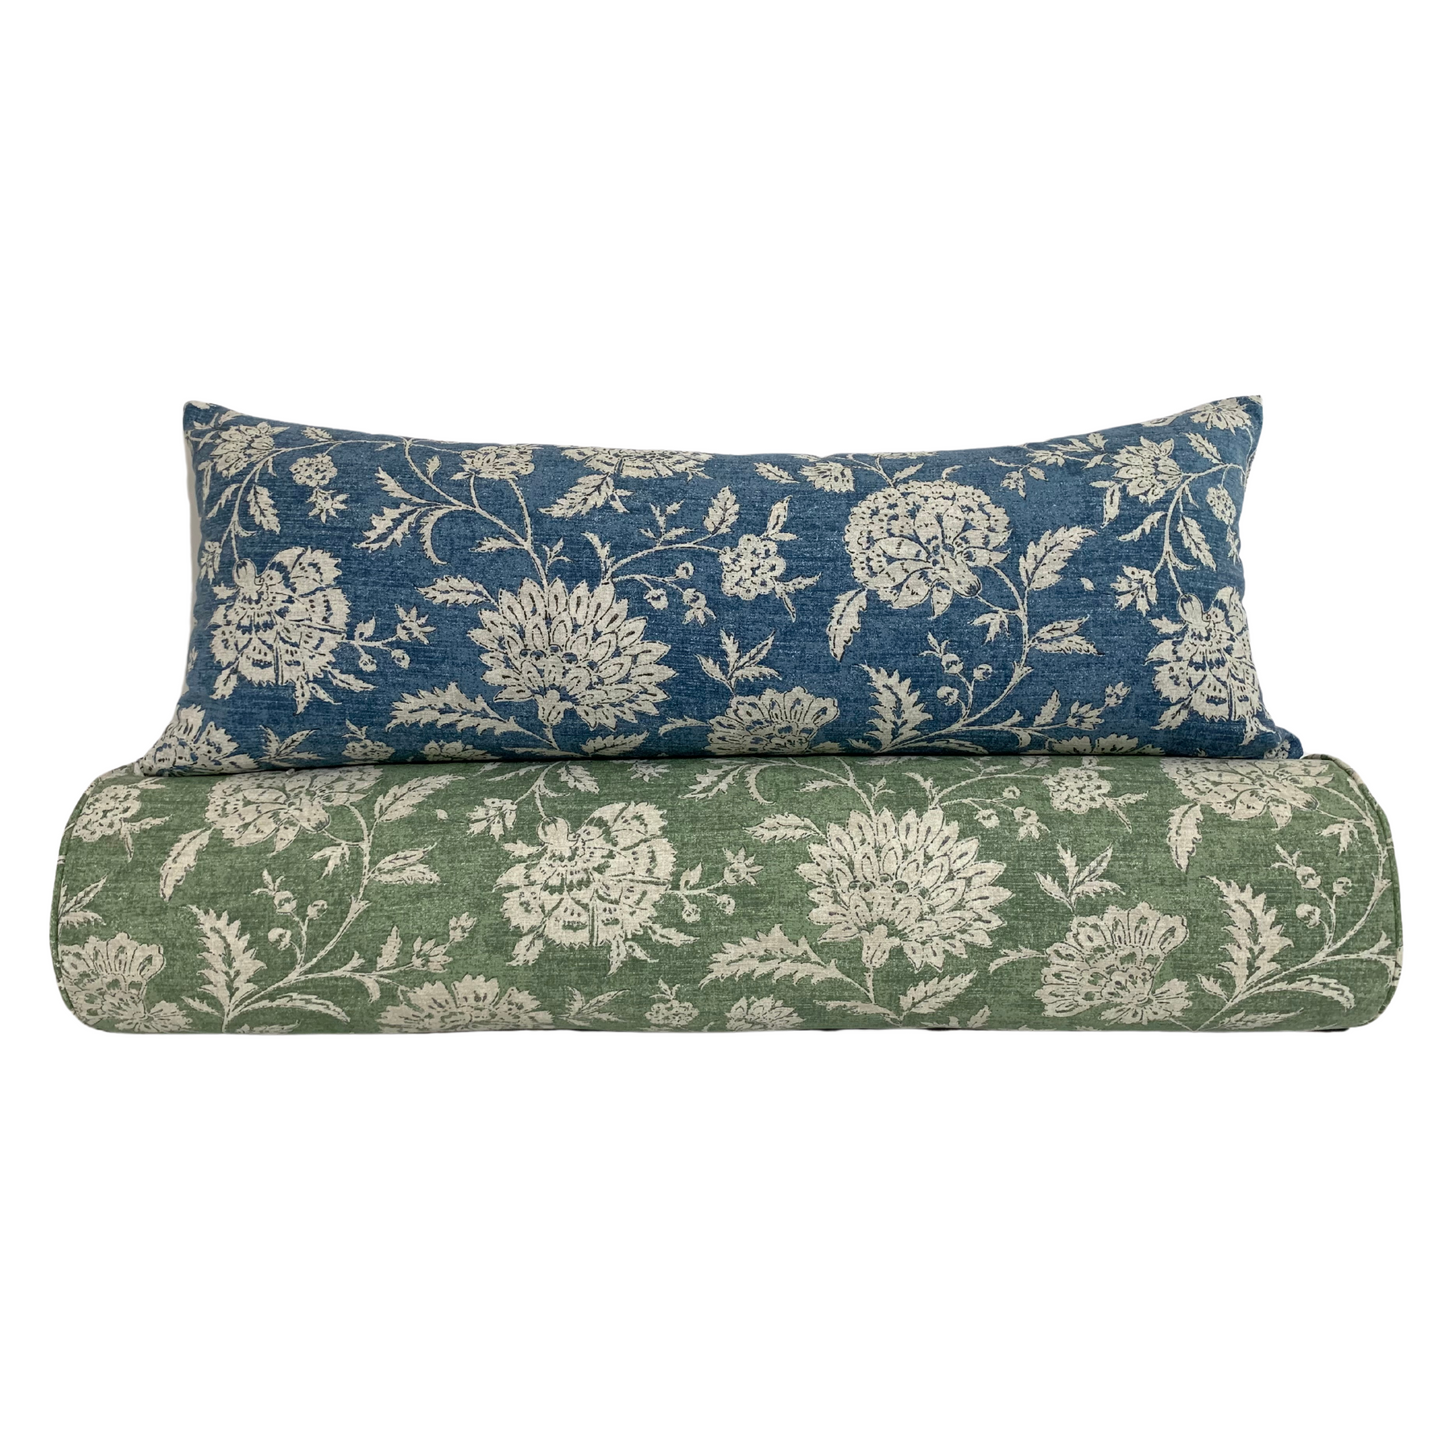 Navy Blue Floral & Foliage Pillow Cover - Available in Lumbar, Bolster, Throw, Euro Sham Sizes